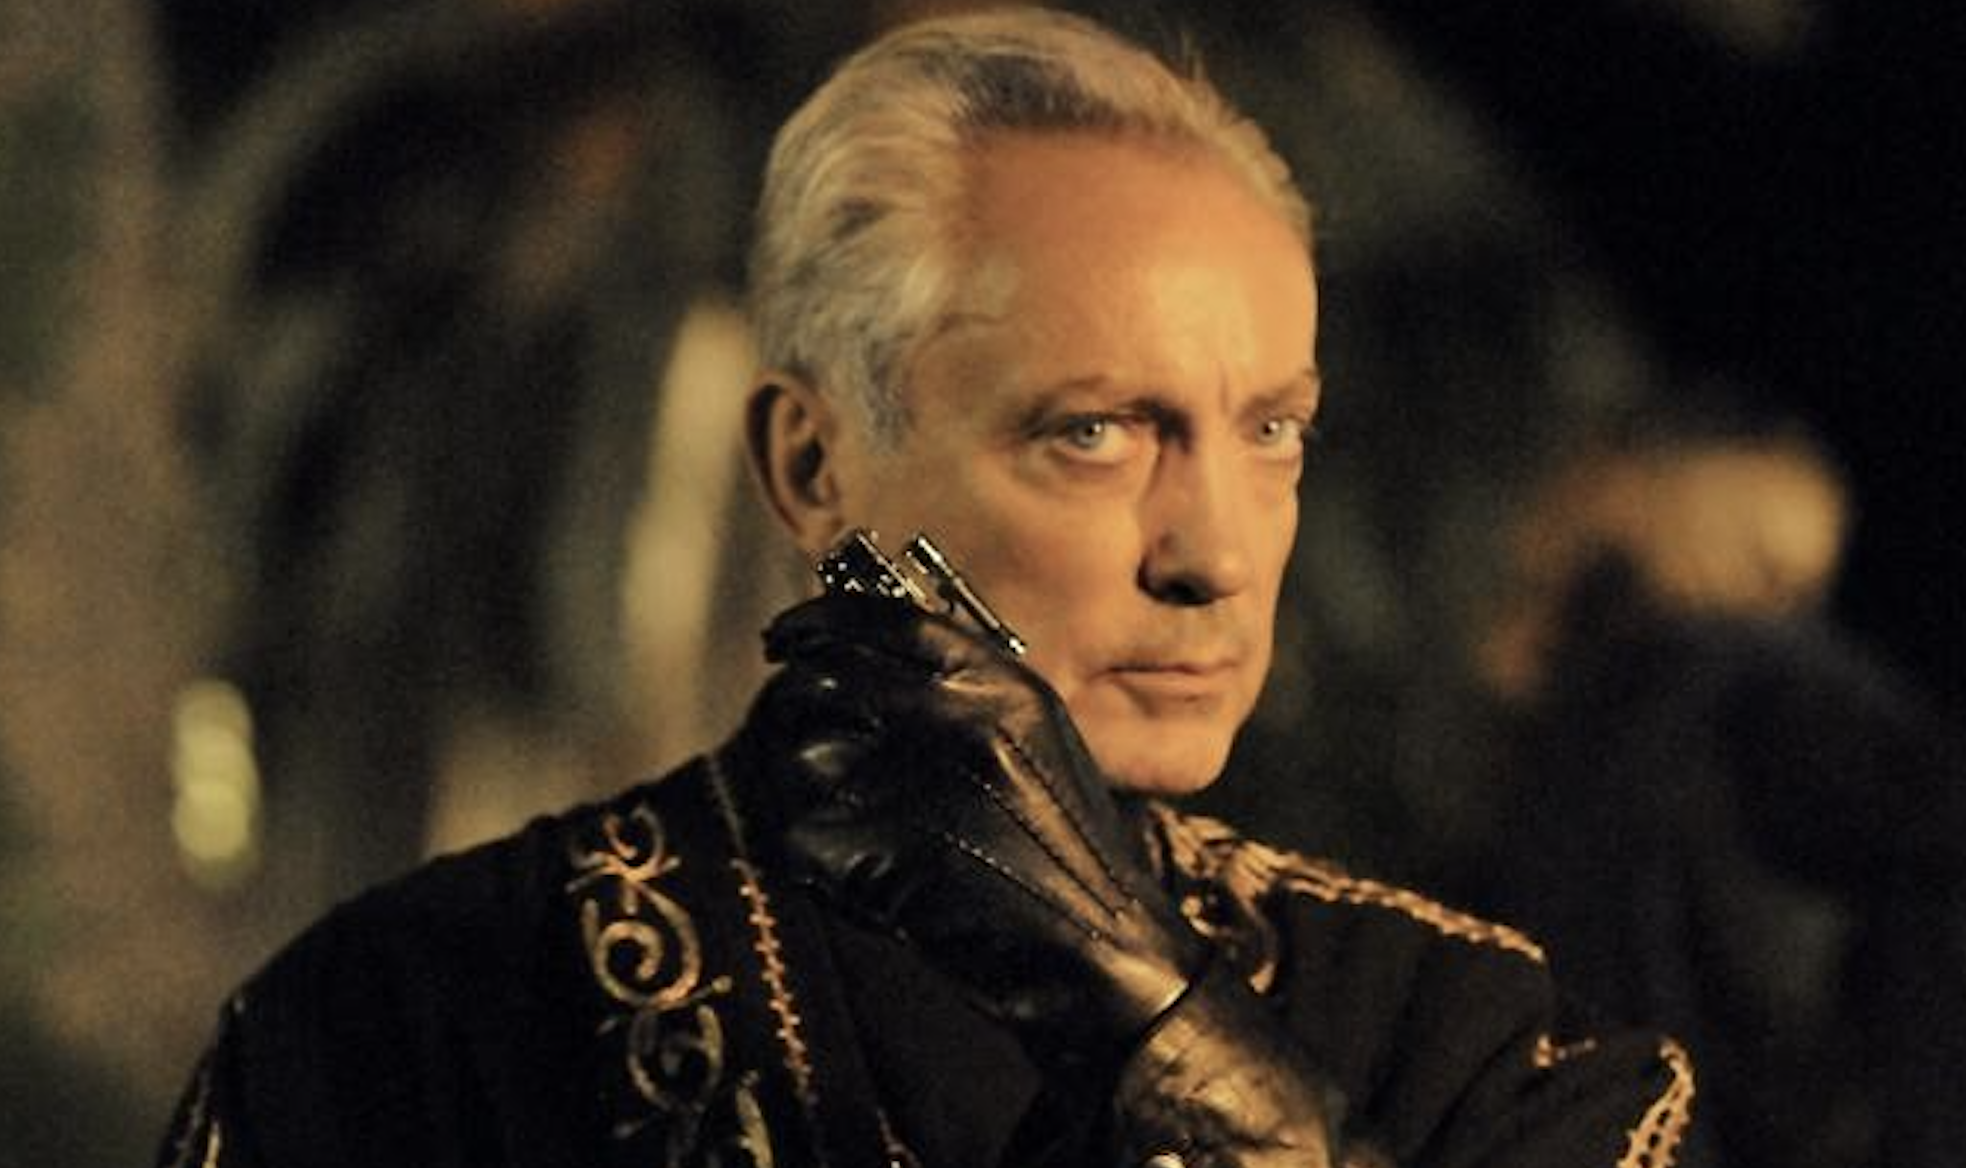 'Skeletons in the Closet’: La Llorona Horror Movie Replaces Director, Casts Udo Kier and More